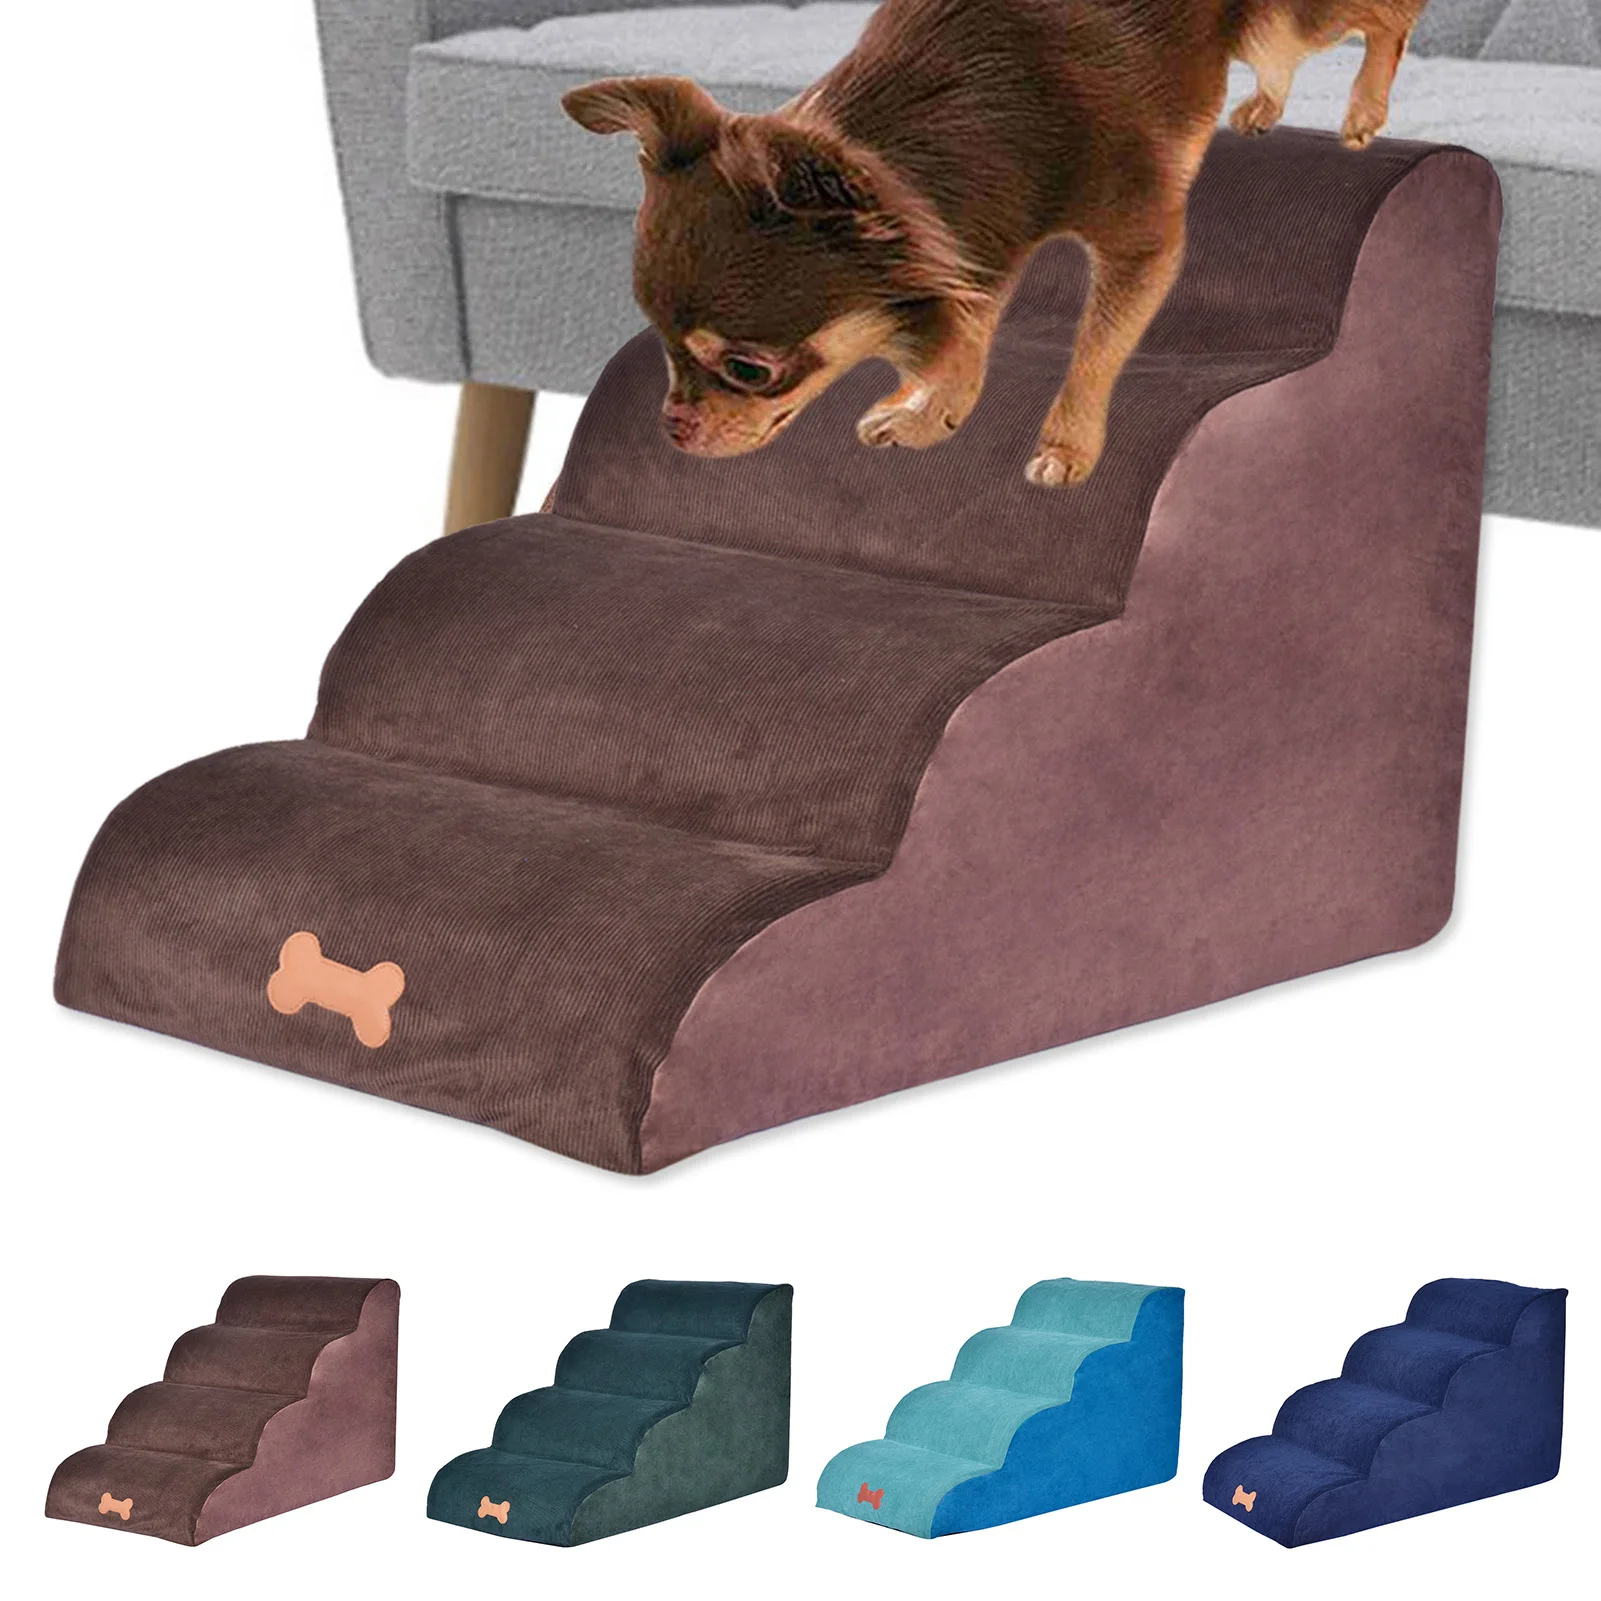 

4 Tiers Steps Dog Stairs for Small Dogs Cats House Ramp Ladder Removable Washable Non-Slip Pet Ramp Stairs Pet Supplies